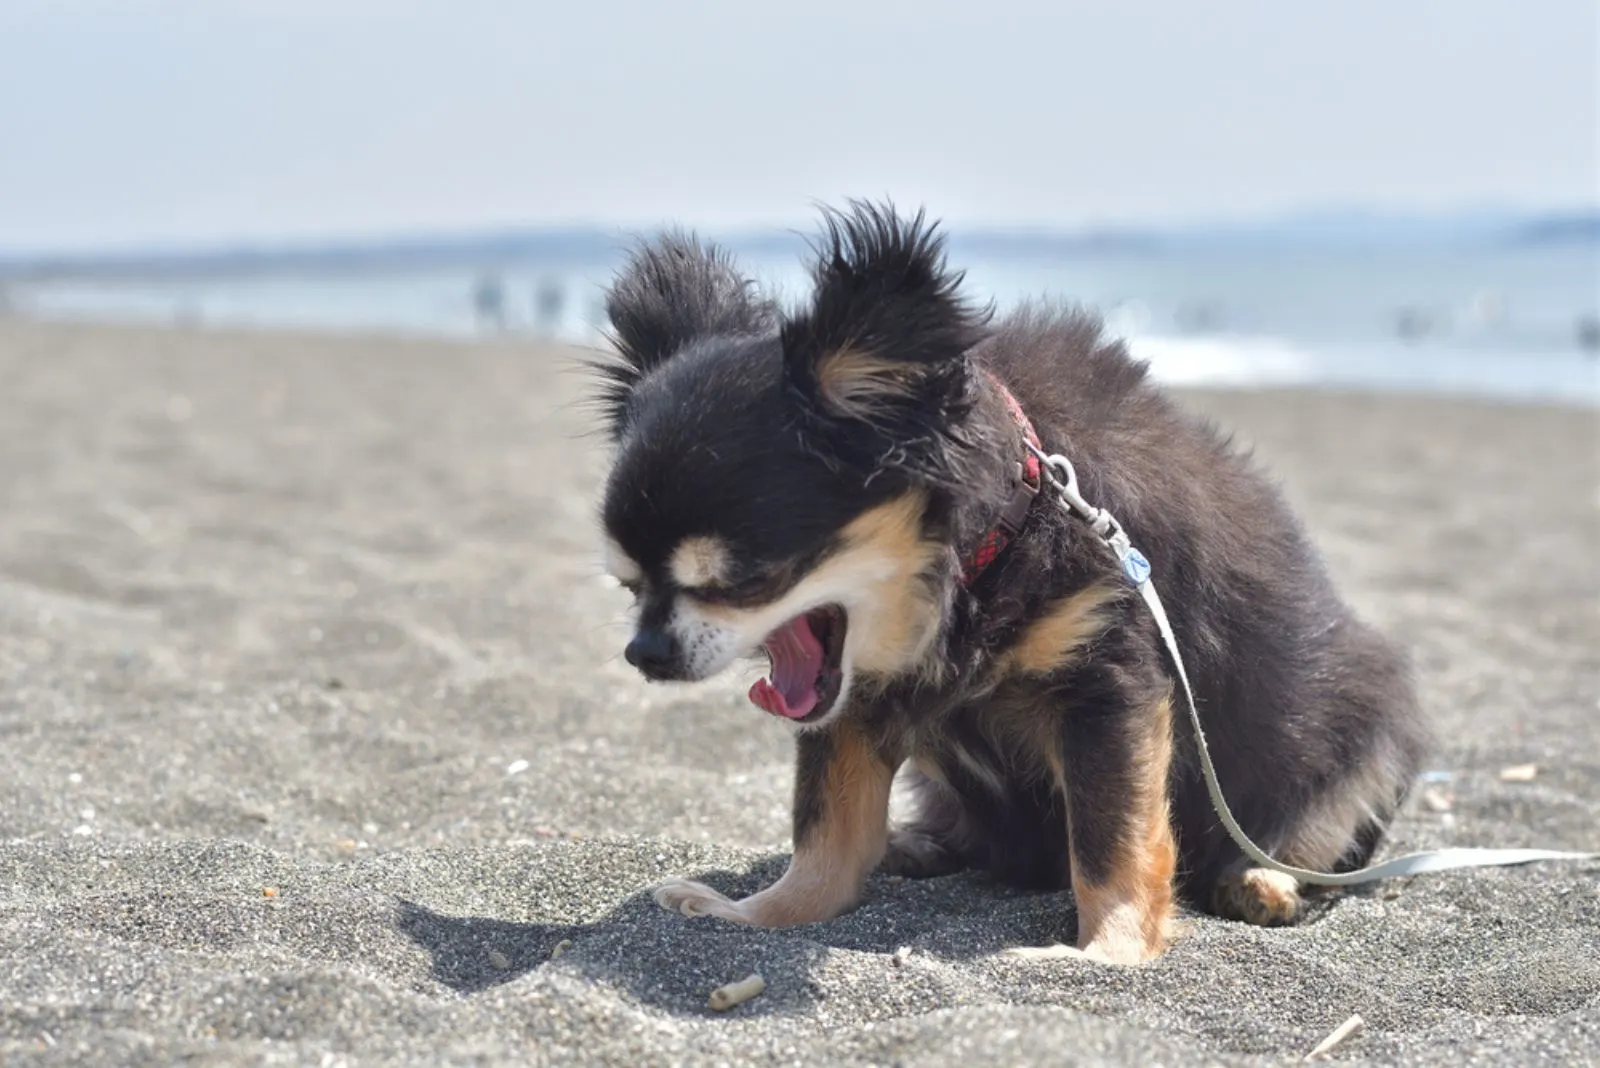 chihuahua sneezing on the sandy beach